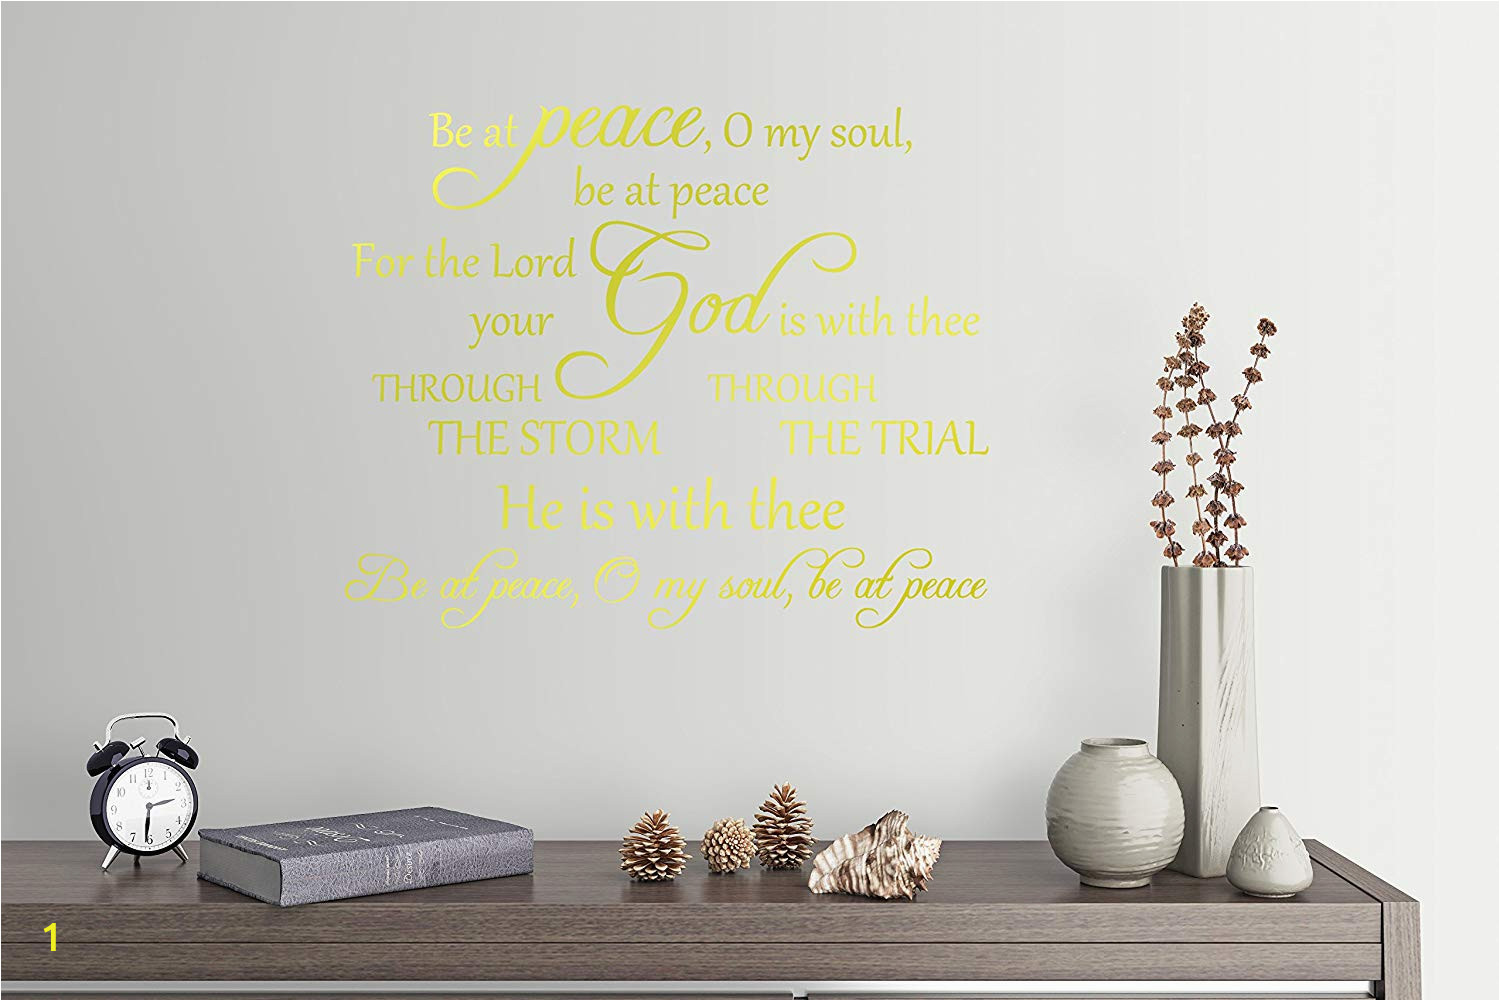 Wall Mural Installation Cost Amazon 28"x24" Be at Peace for the Lord Your God is